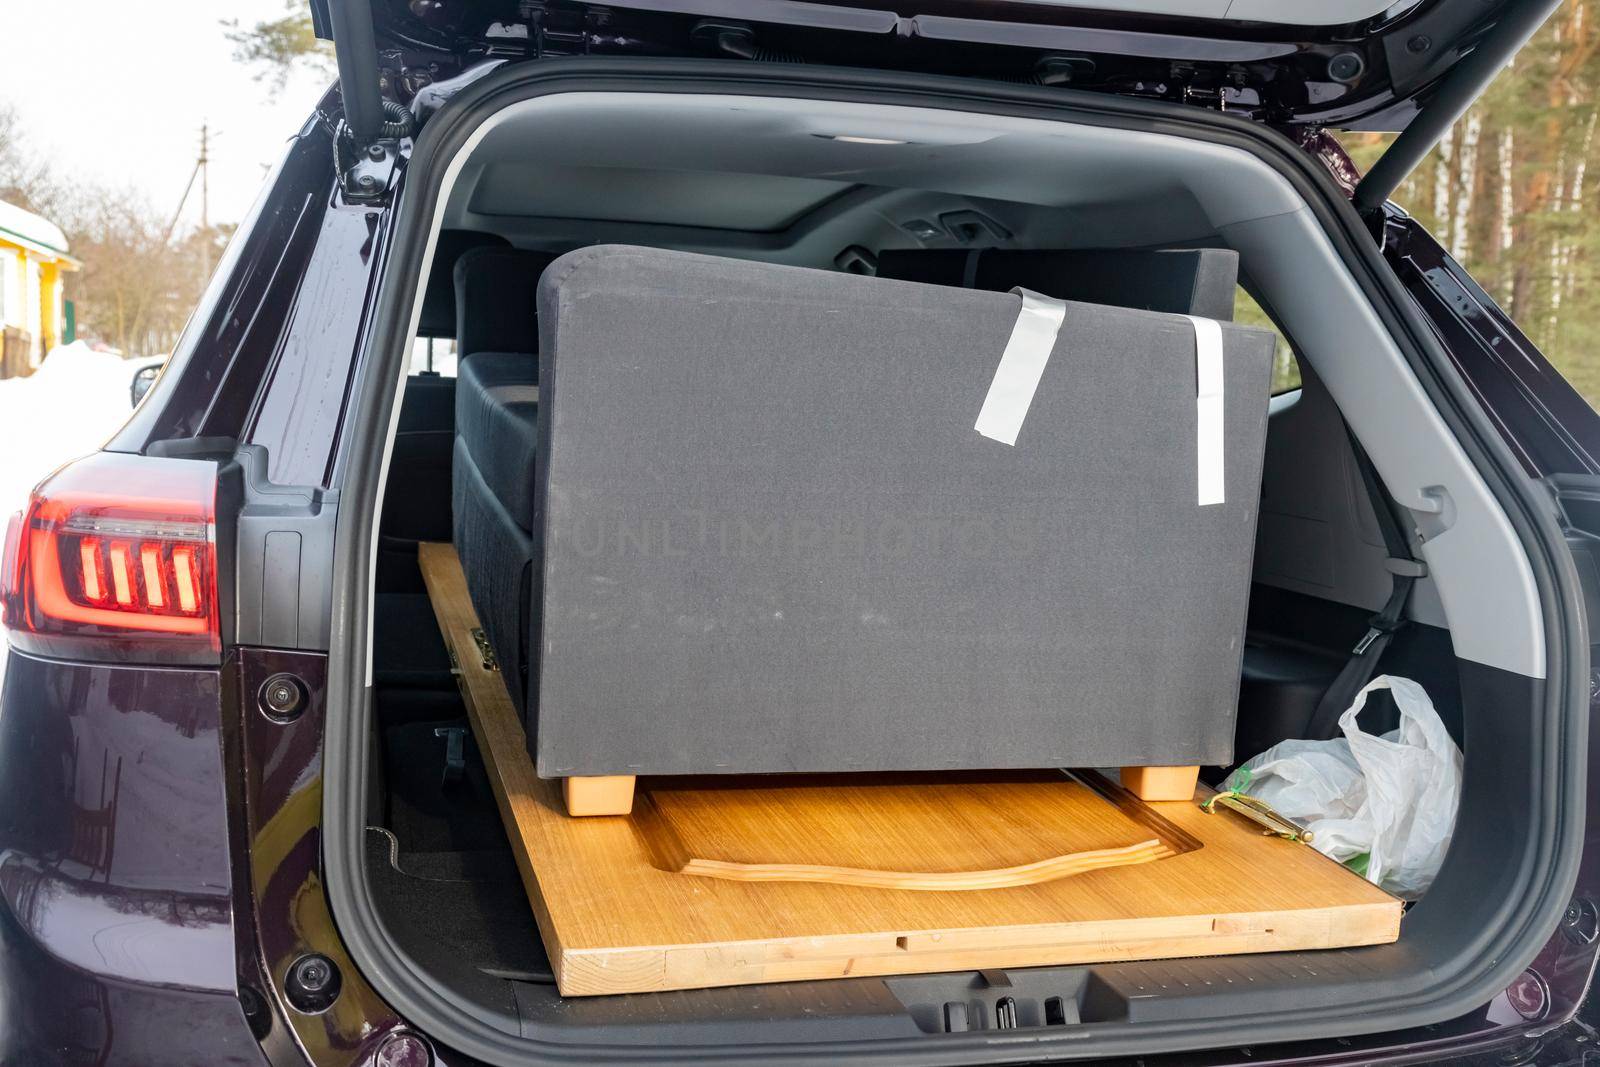 furniture in the passenger car. SUV large trunk volume. no people. close up.